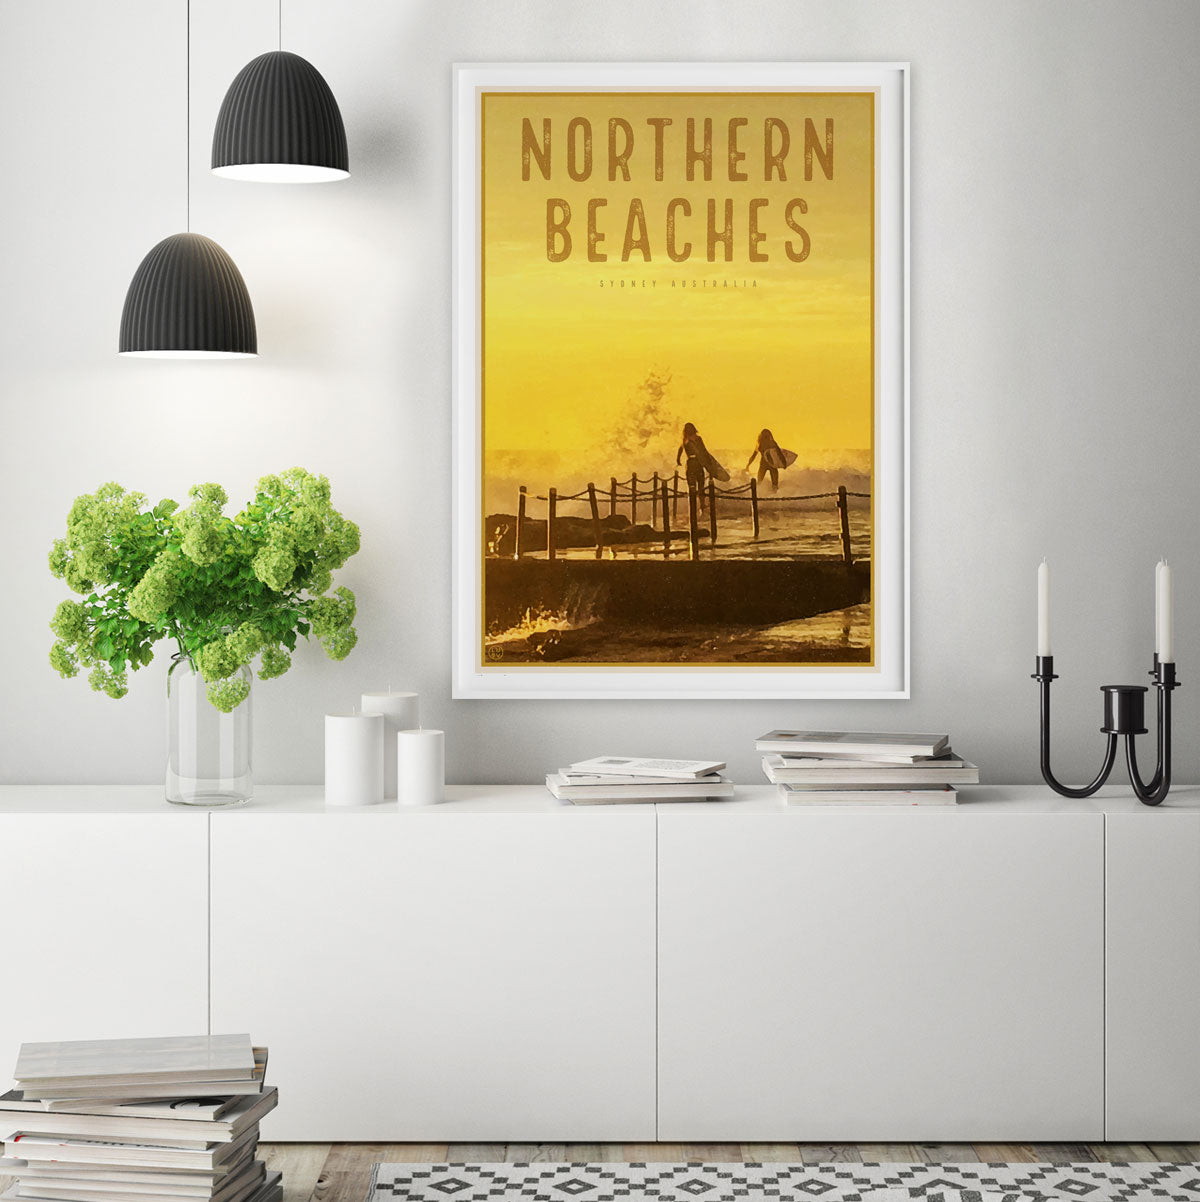 Northern Beaches vintage travel style prints by Places We Luv 